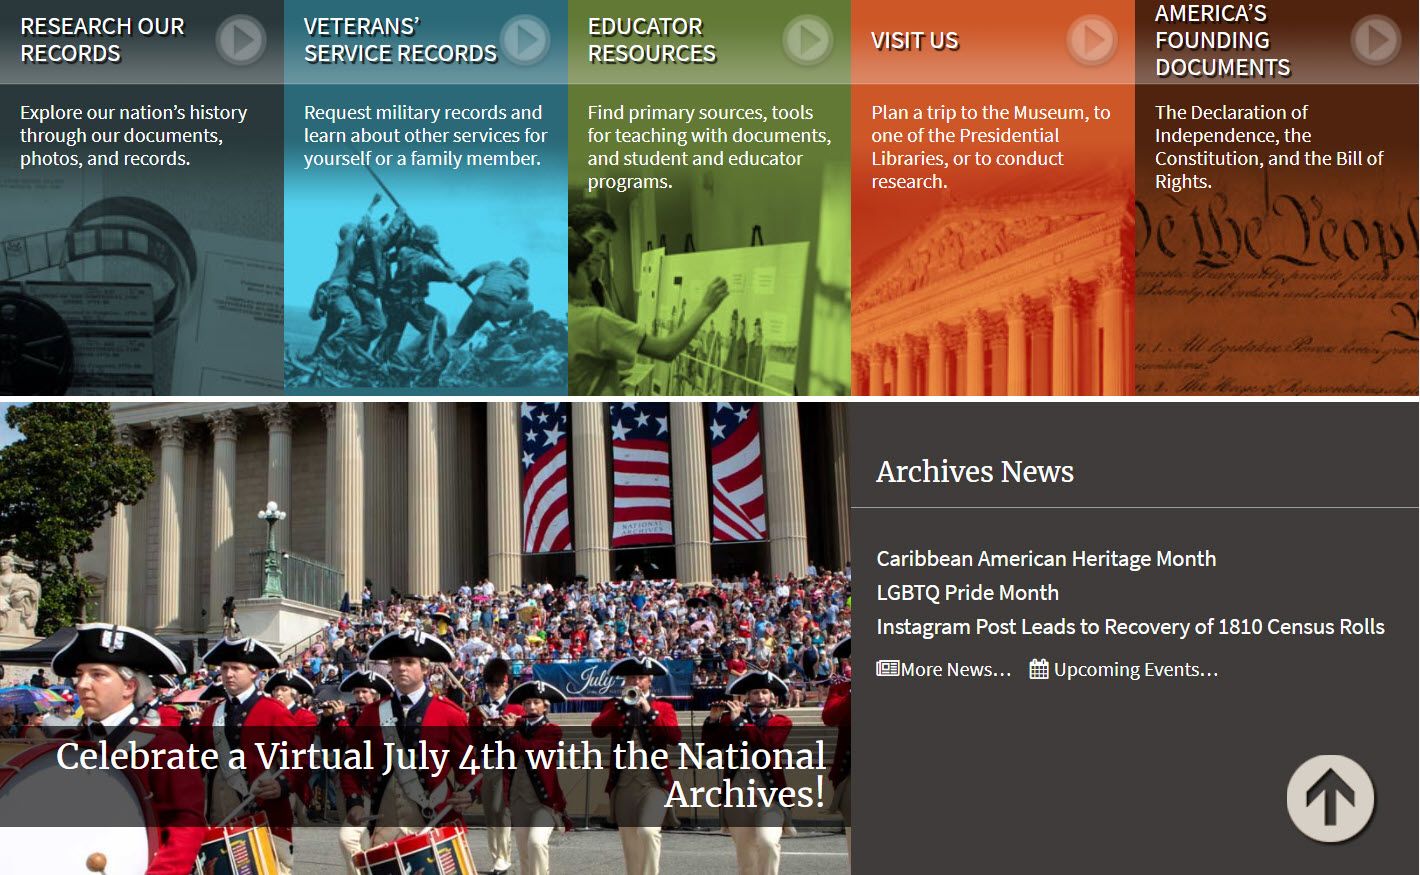 The National Archives and Records Administration website